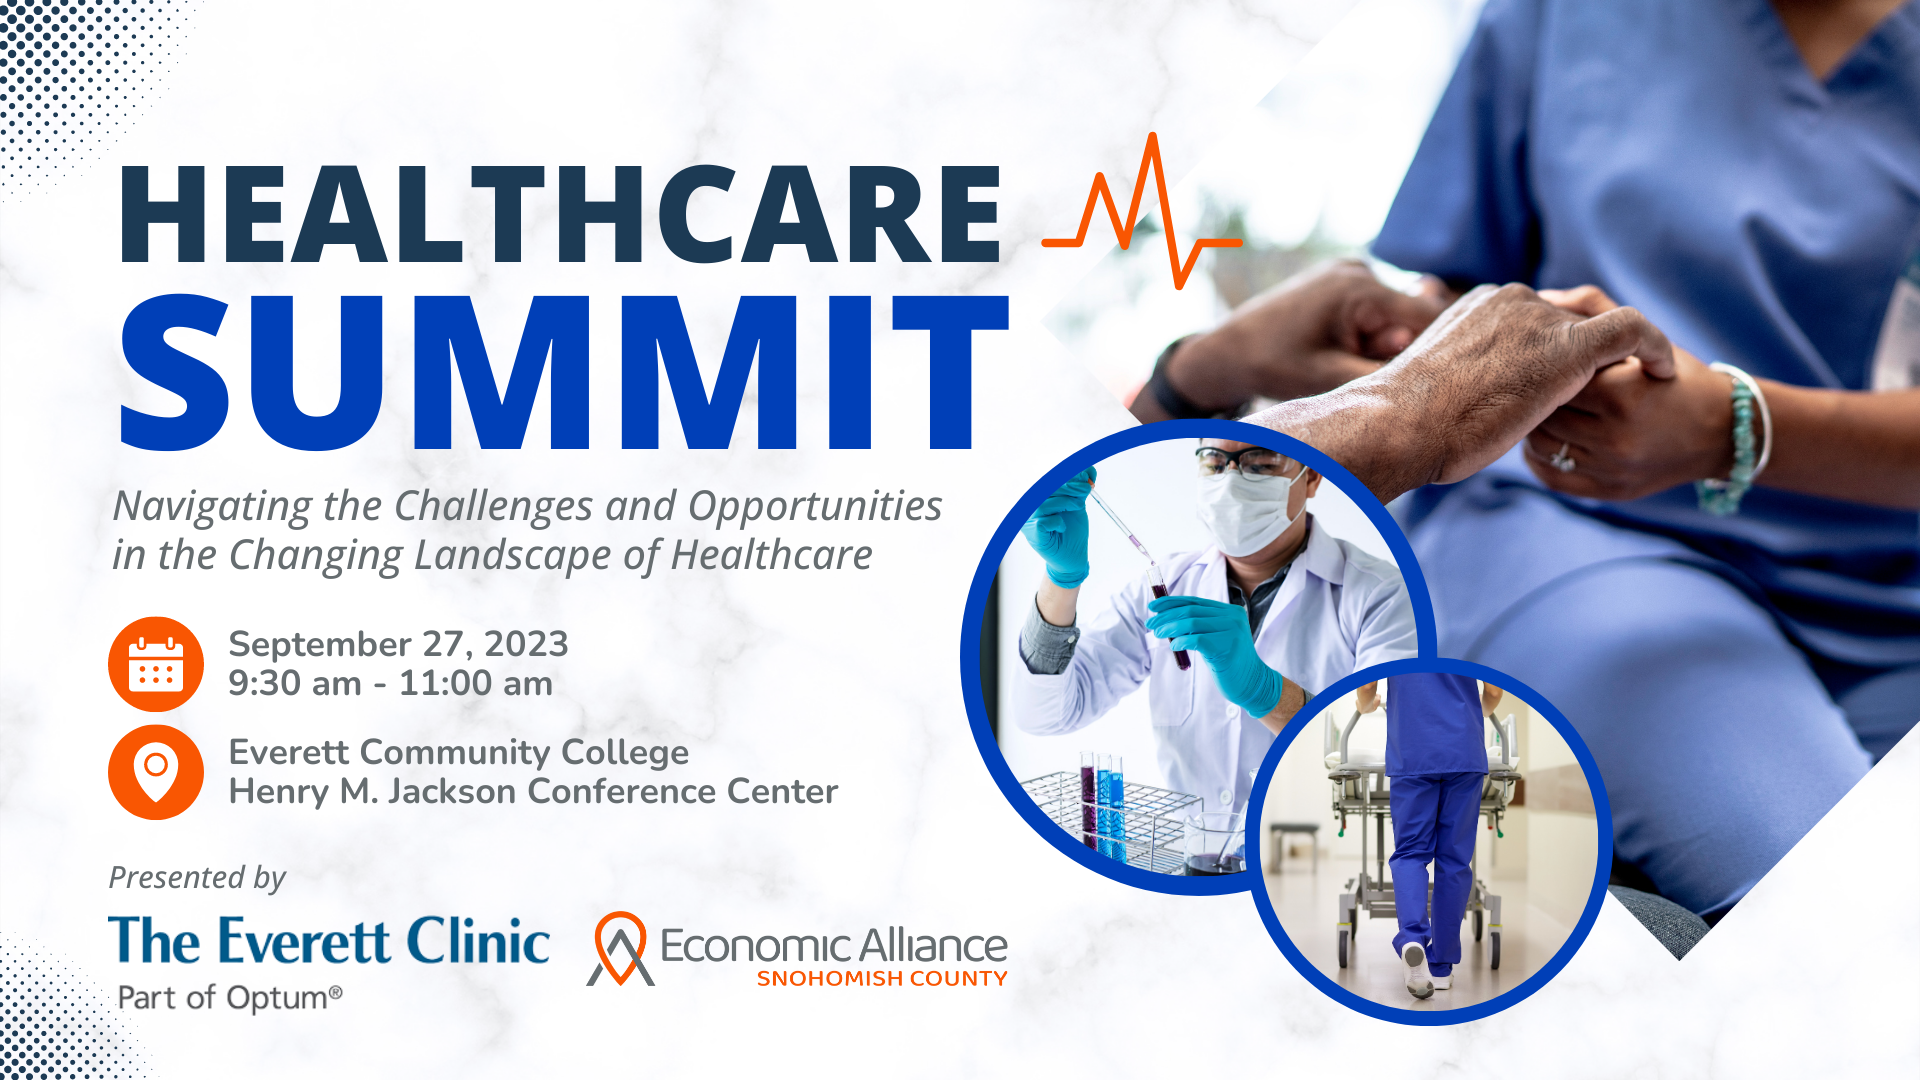 Event Promo Photo For Healthcare Summit - Navigating the Challenges and Opportunities in the Changing Landscape of Healthcare